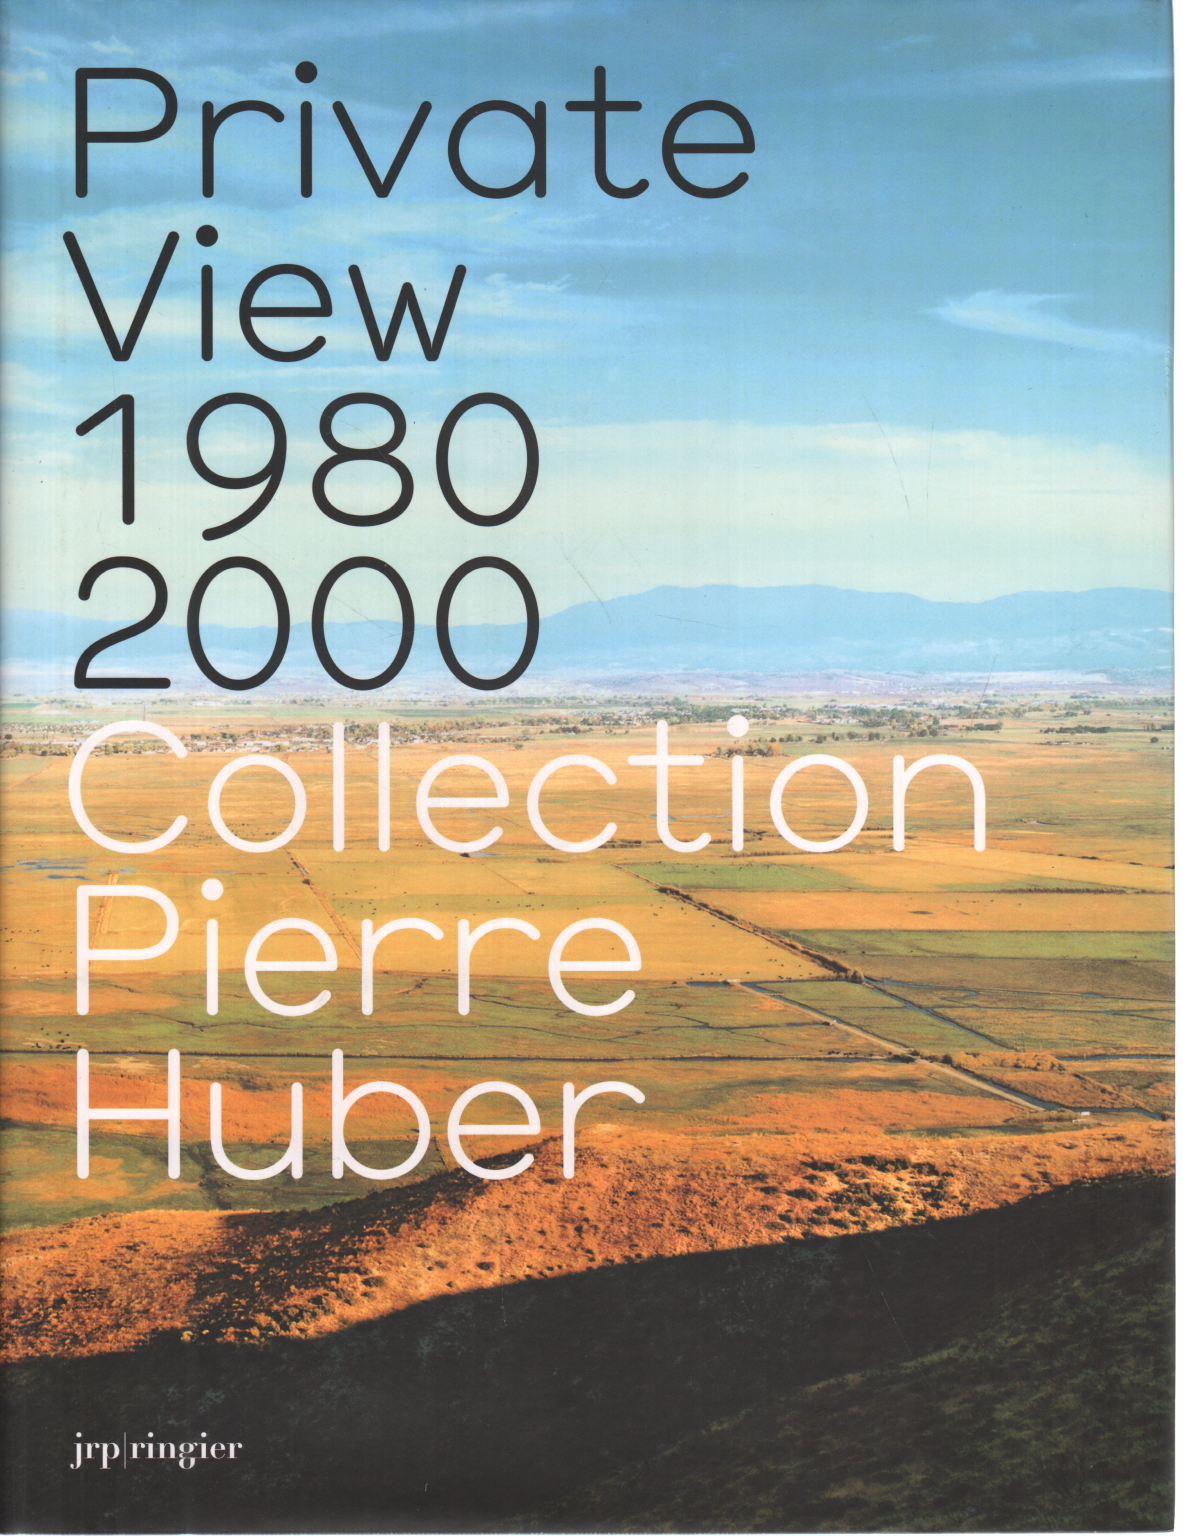 Private View 1980 2000 Collection Pierre Hubert, Yves Aupetitallot